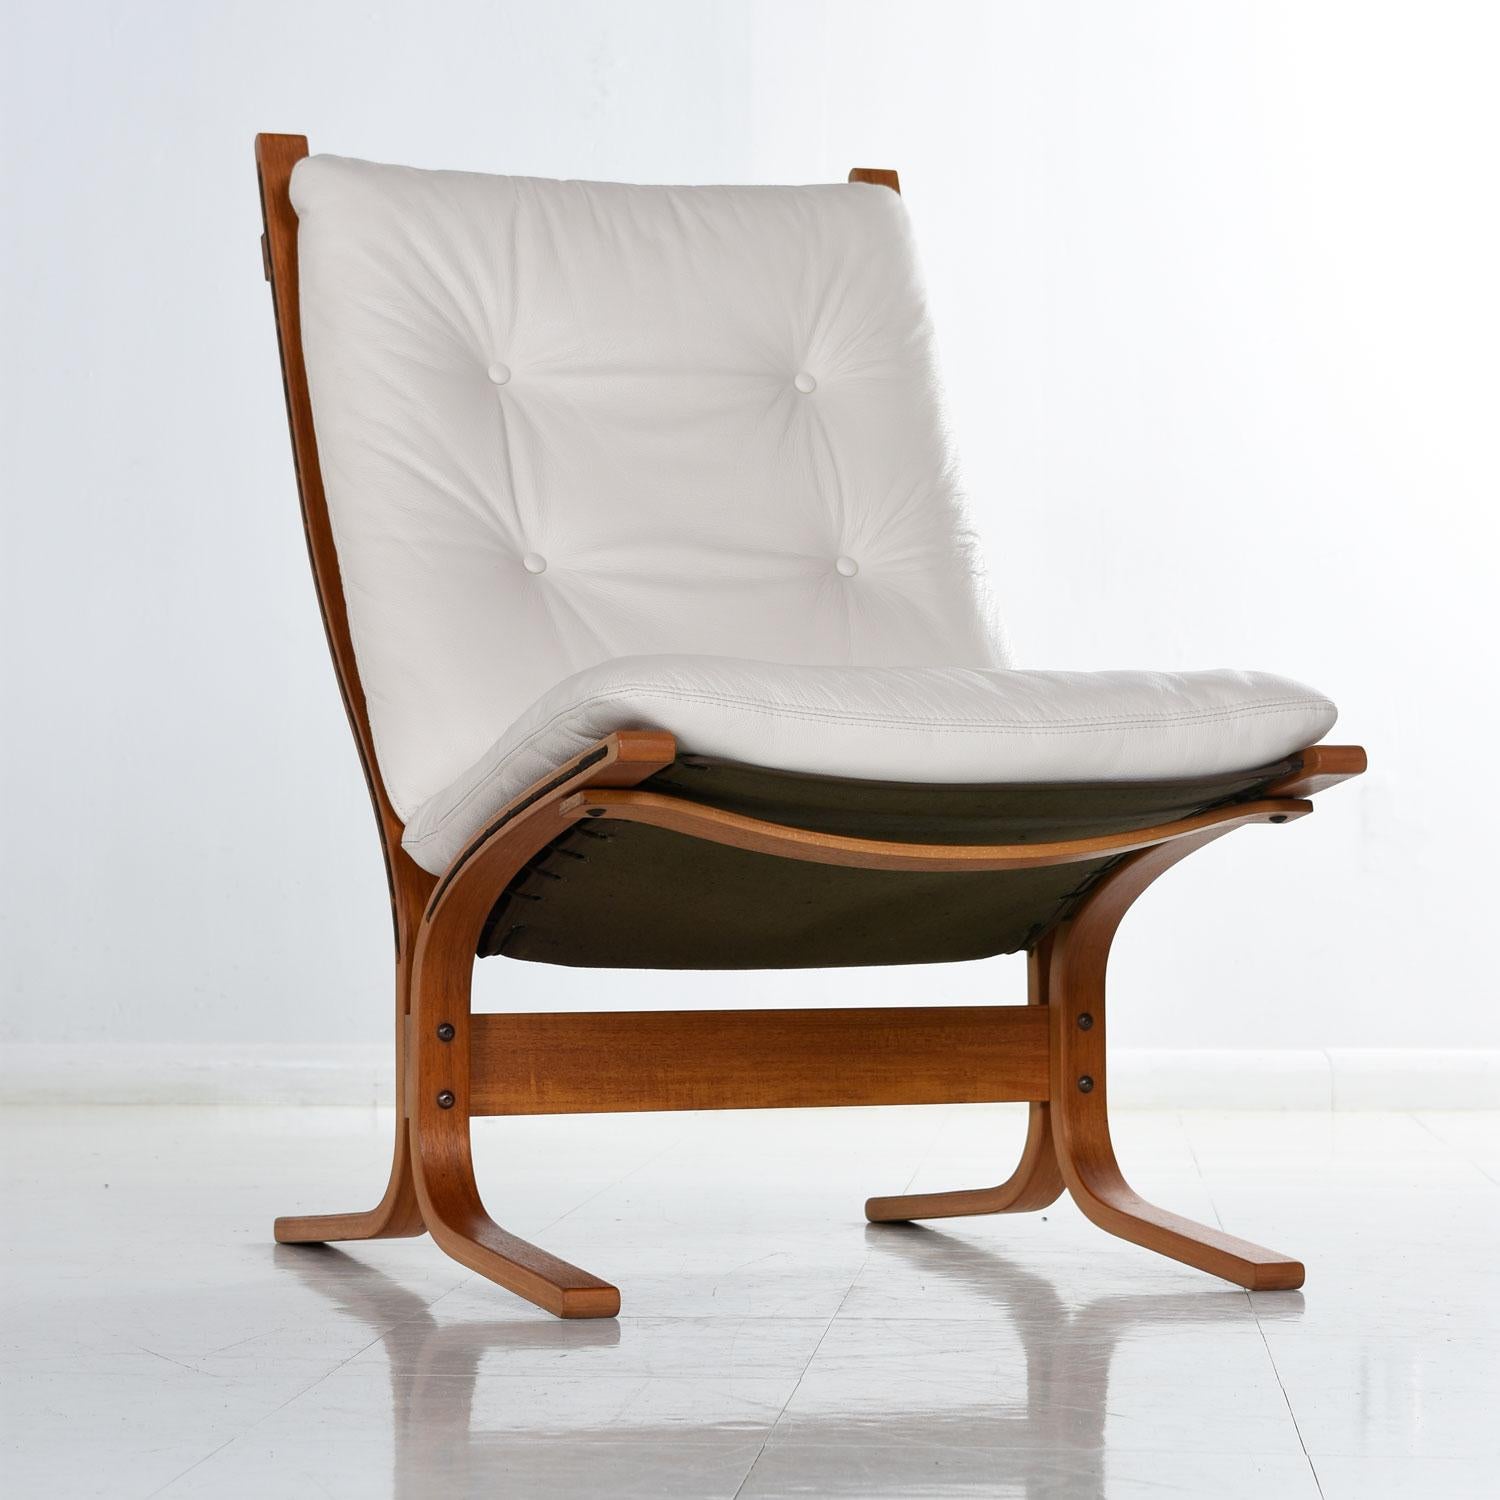 Norwegian White Leather Siesta Lounge Chairs and Ottoman by Ekornes of Norway